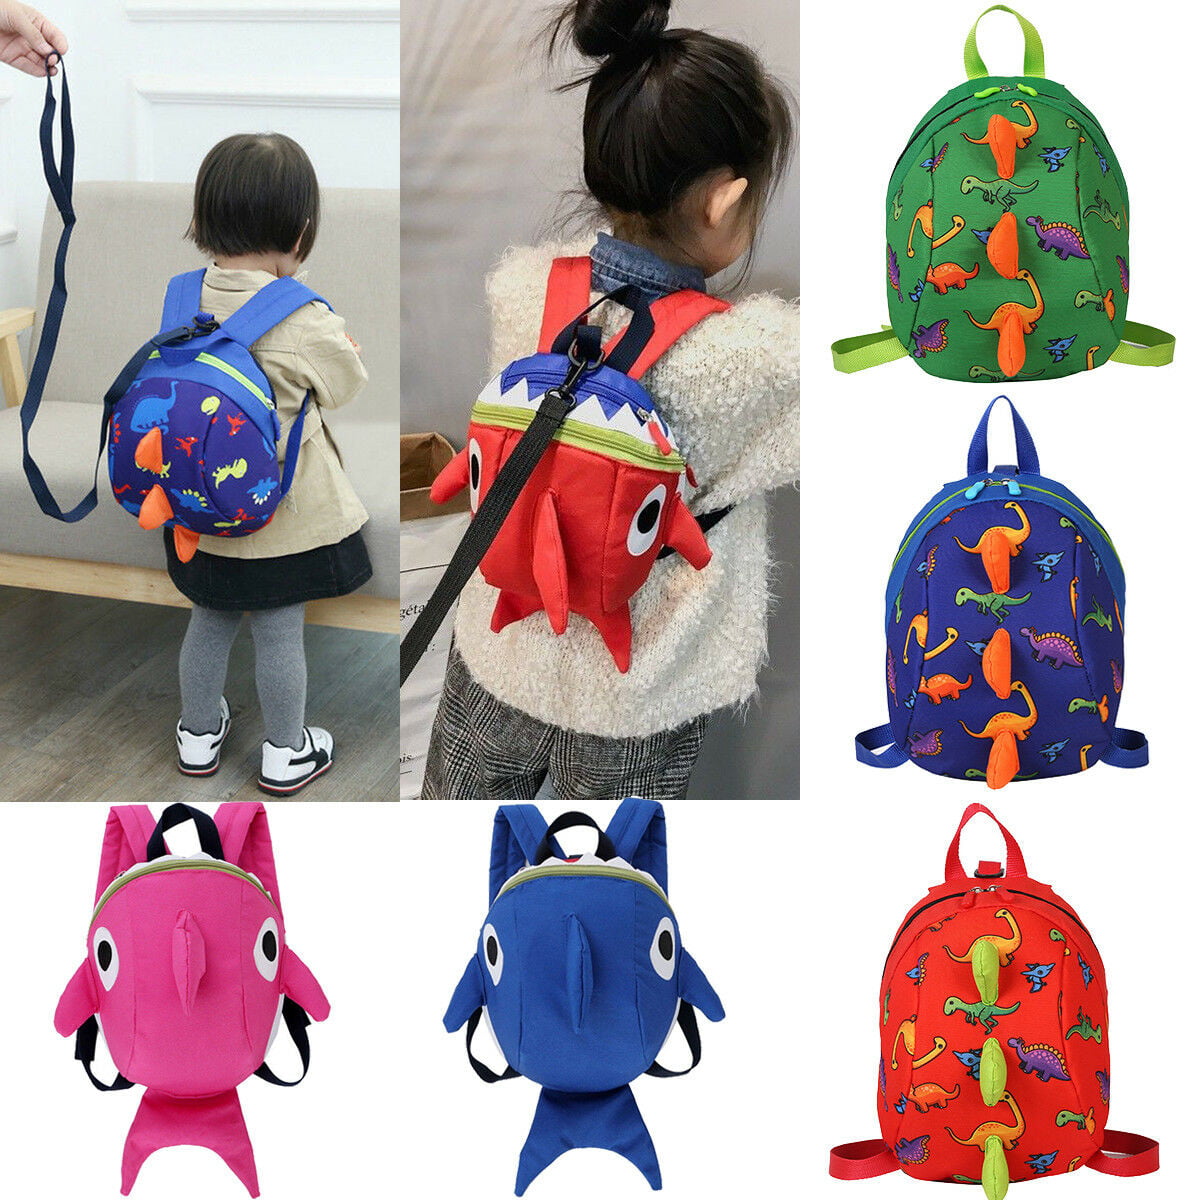 Cartoon Baby Toddler Kids Dinosaur Safety Harness Strap Bag Backpack With Reins 